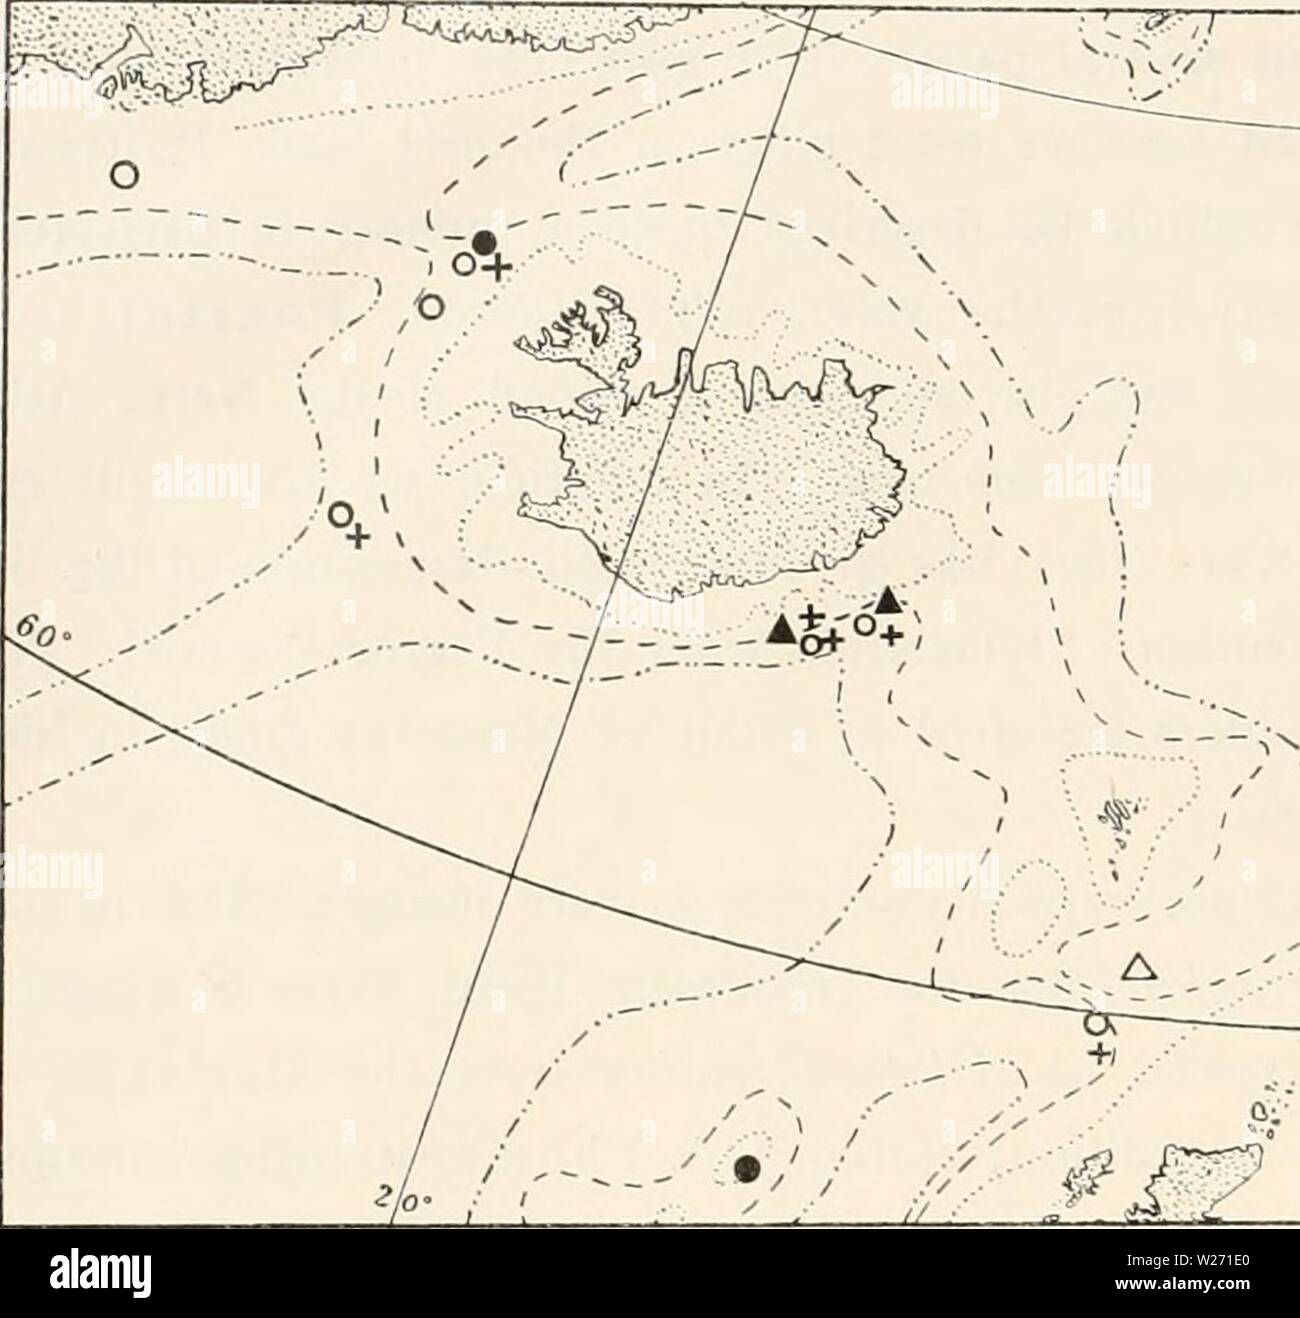 Archive image from page 31 of The Danish Ingolf-Expedition (1914). The Danish Ingolf-Expedition  danishingolfexpe0505ingo Year: 1914  24 STYLASTERIDAE must be regarded as characteristic forms of the large biocoenosis of the coral reefs. This is also strengthened by the single discovery of Stylaster gemmascens made in the Hjelte Fjord in the neighbourhood of Bergen, where Dr. O. Nordgaard has obtained two small fragments of colonies from the coral reef there. We thus see that the two Stylaster species which occur on the coast of Norway, form interesting parallels in the animal community of the Stock Photo